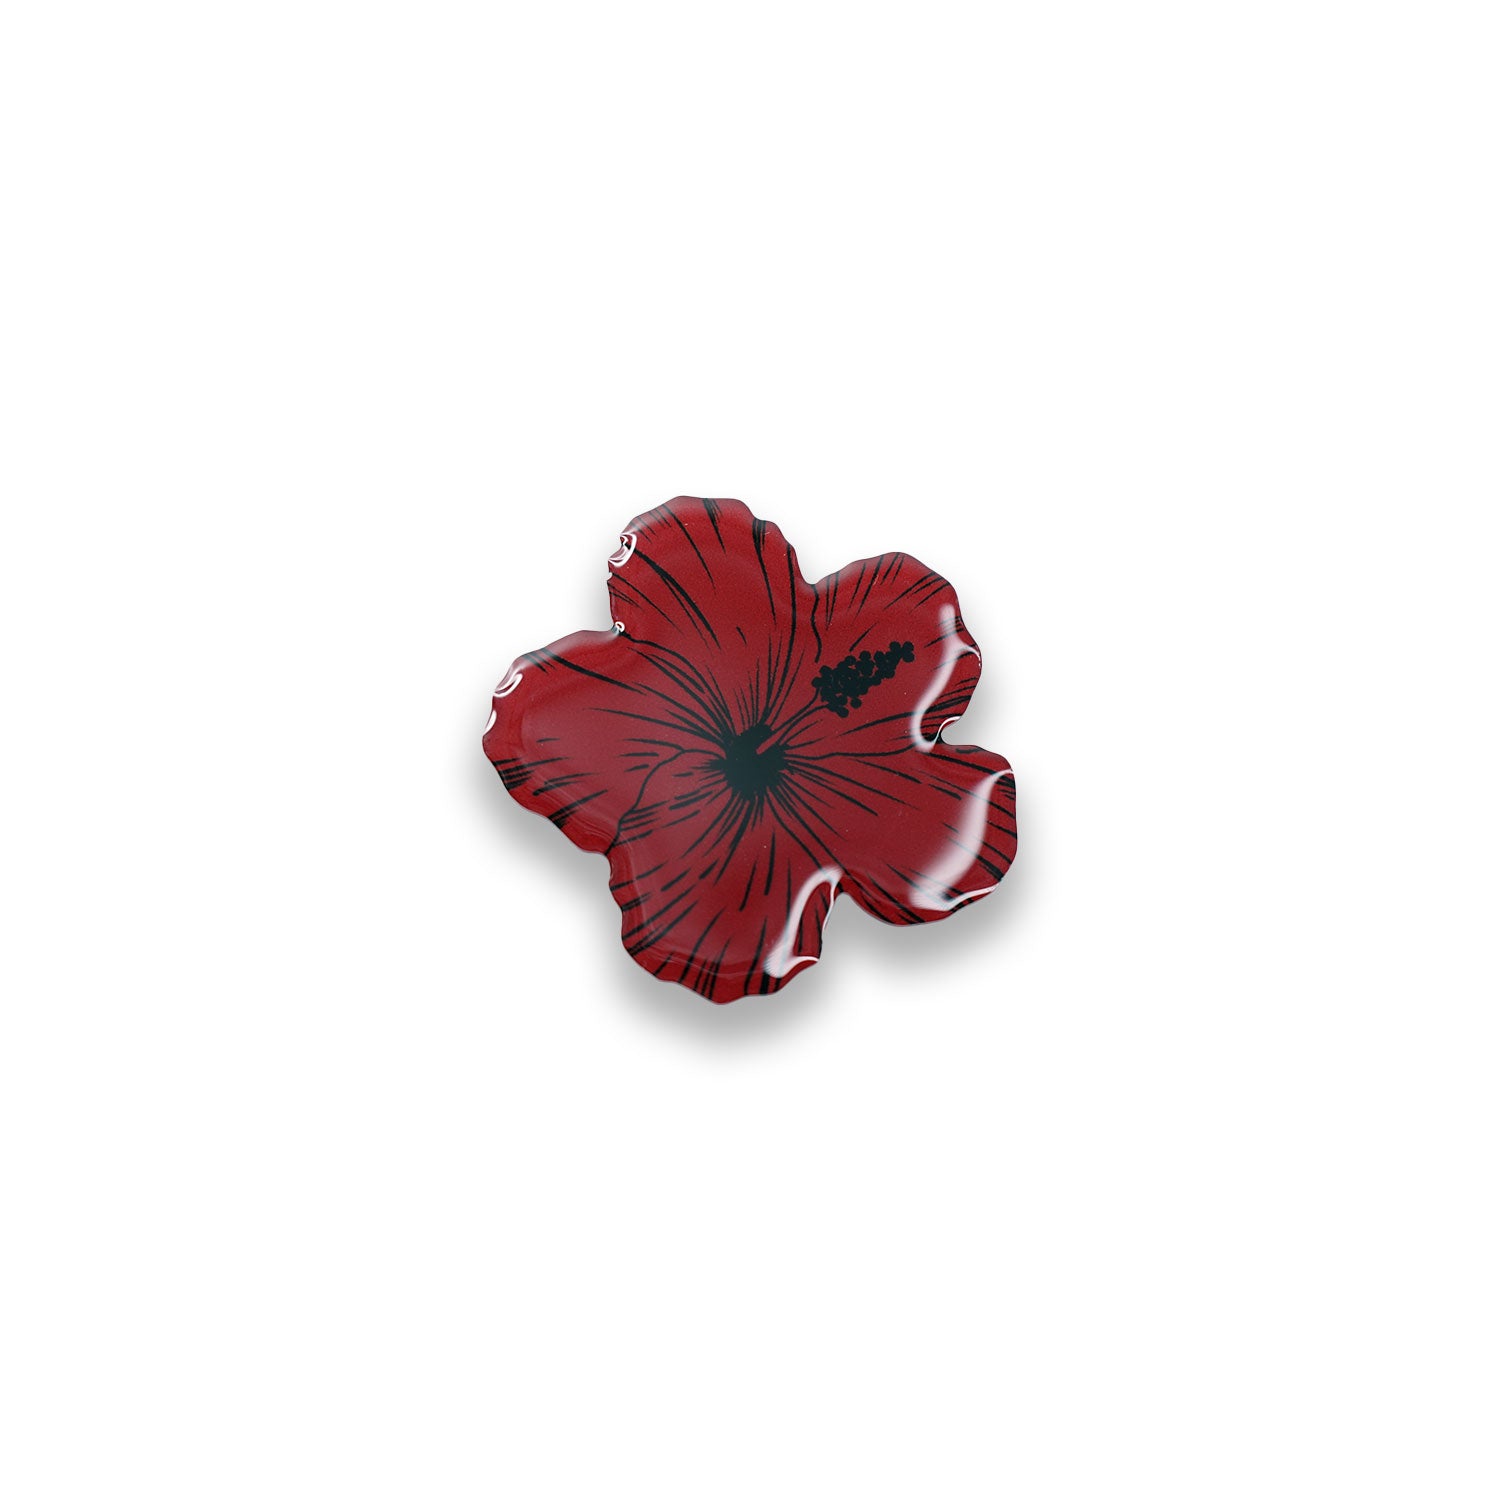 Collapsible Phone Grip - Red Hibiscus